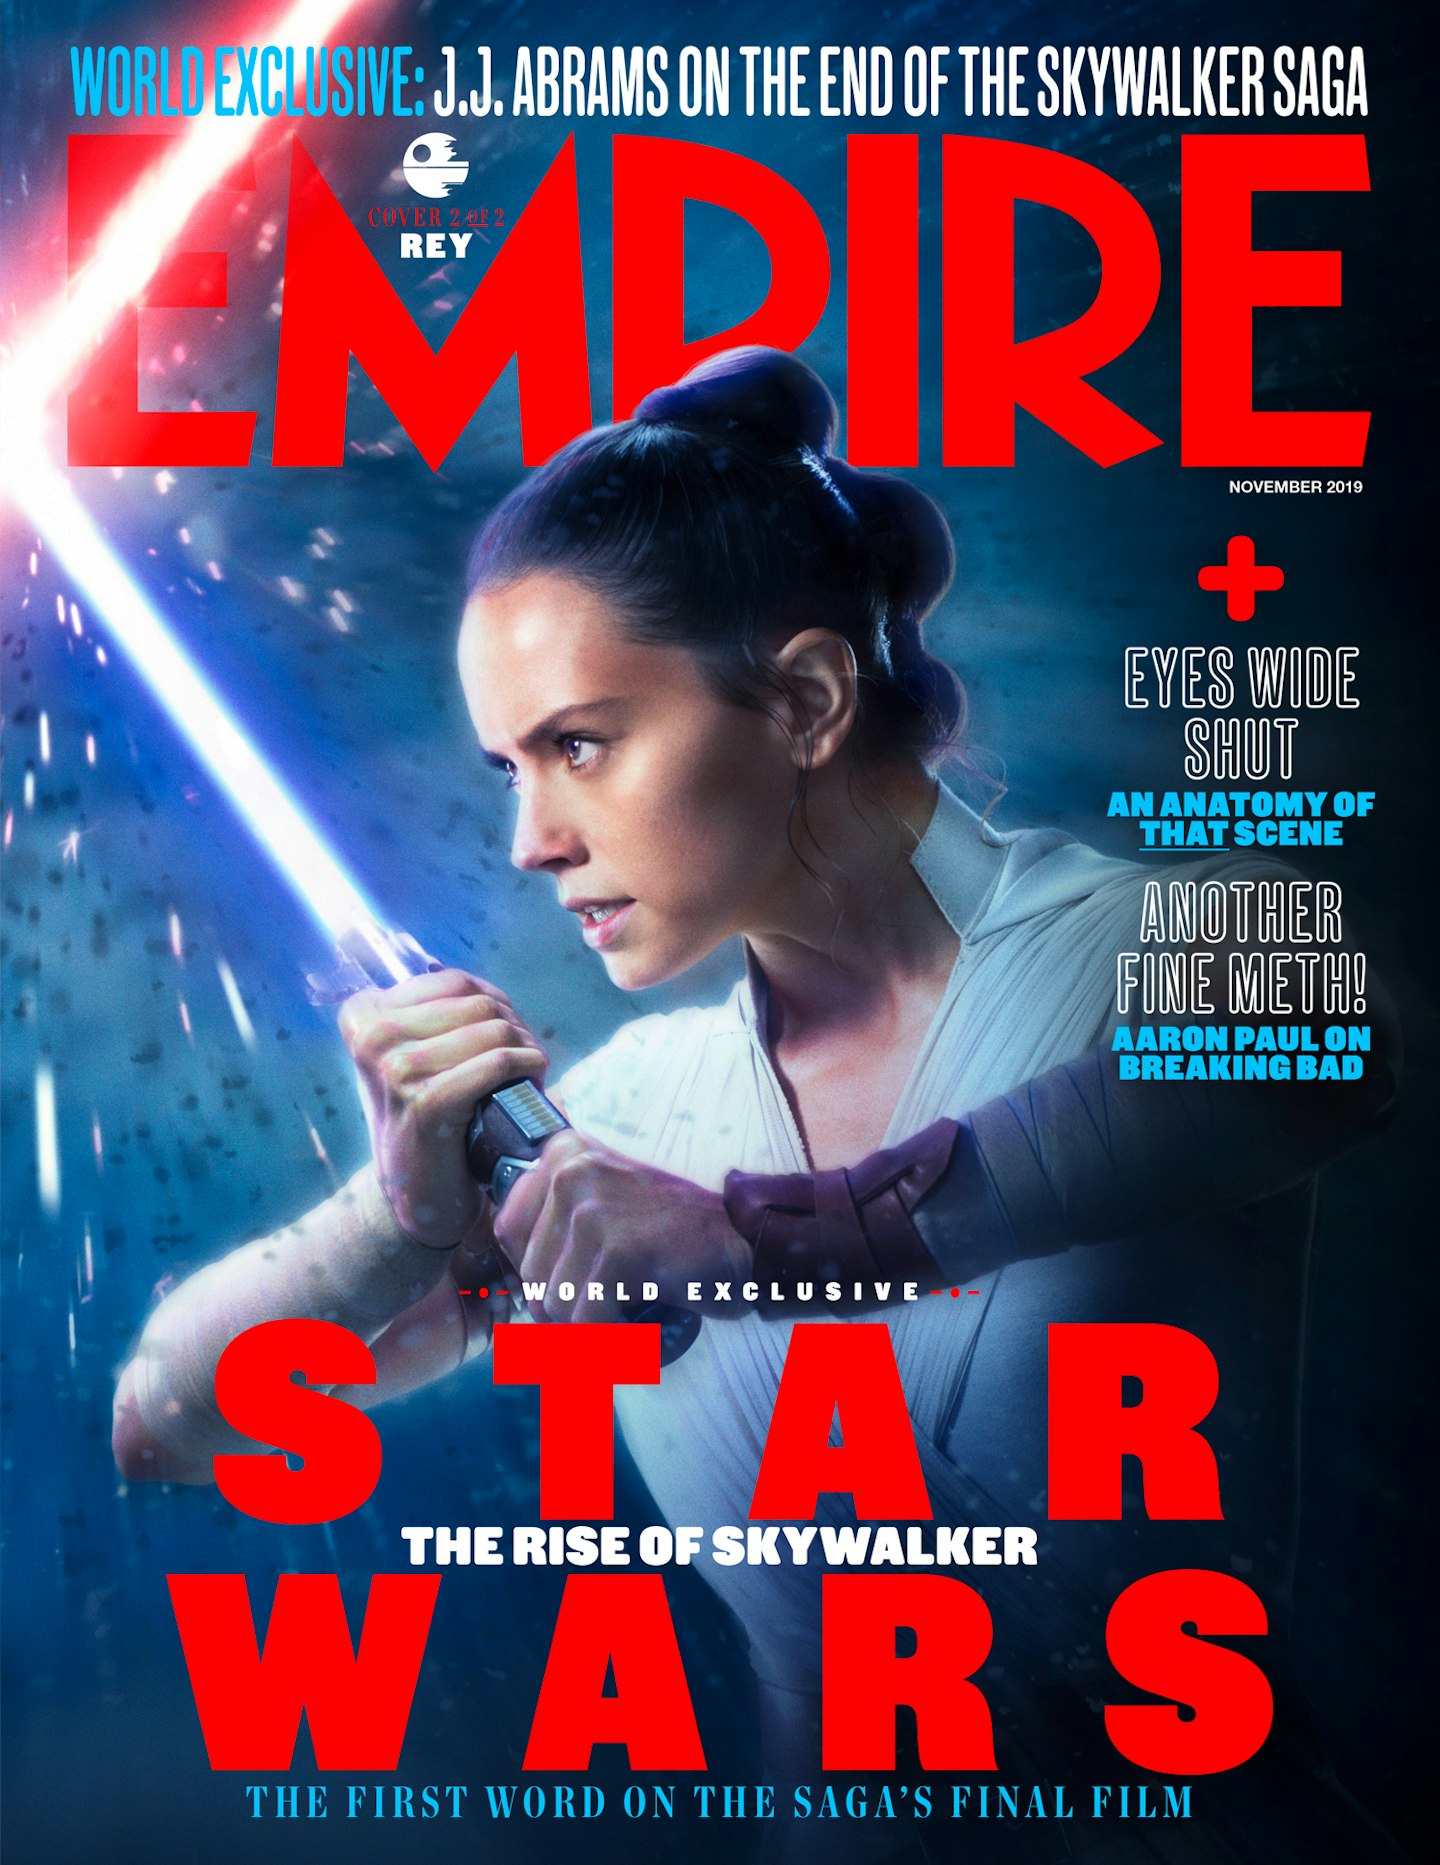 Star Wars: The Rise of Skywalker Exclusive Covers